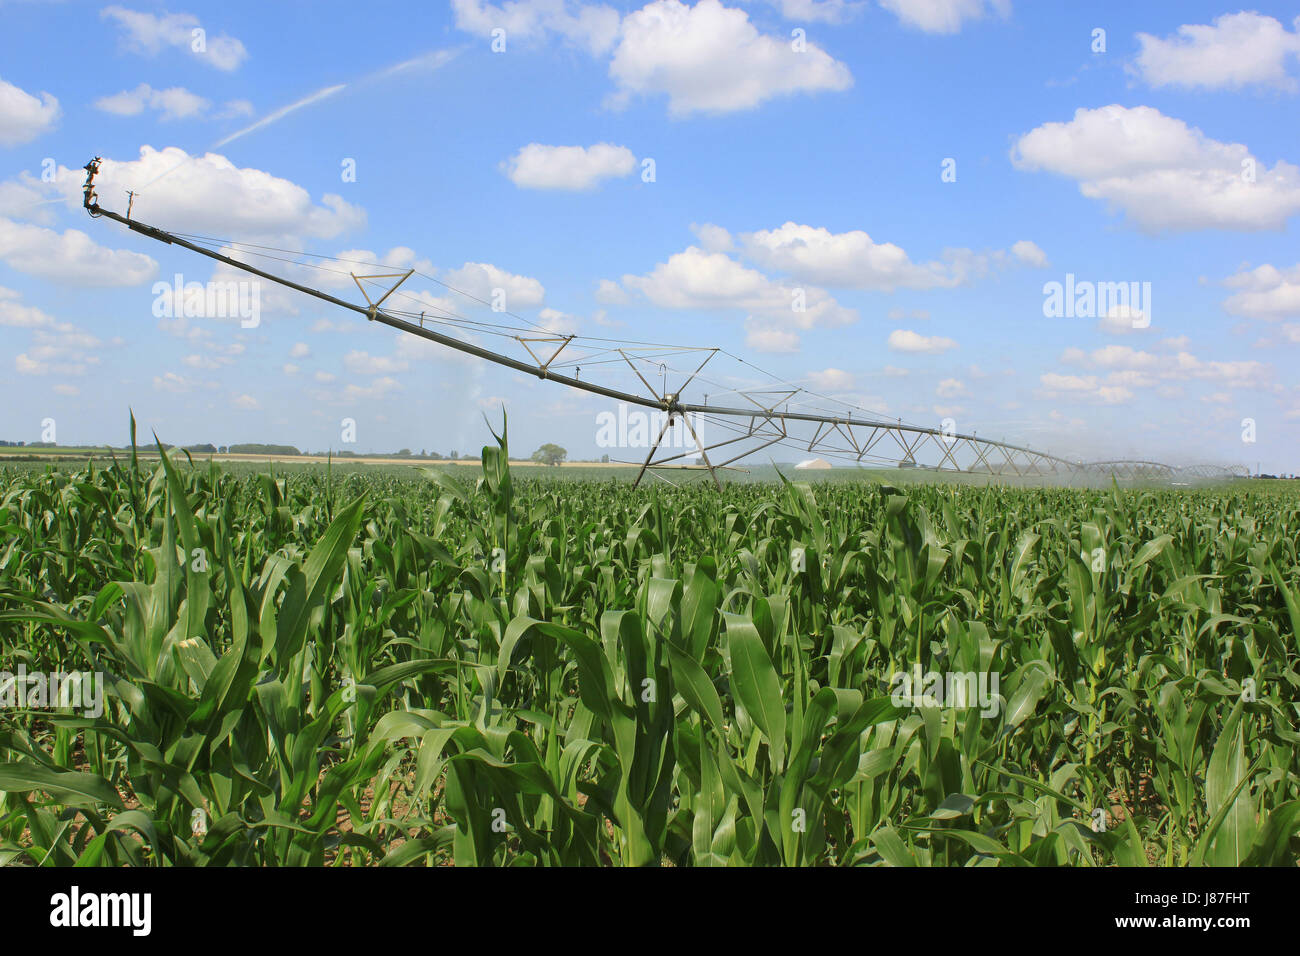 agricultural, agriculture, farming, farm, farmer, automatic, reel, watering  Stock Photo - Alamy